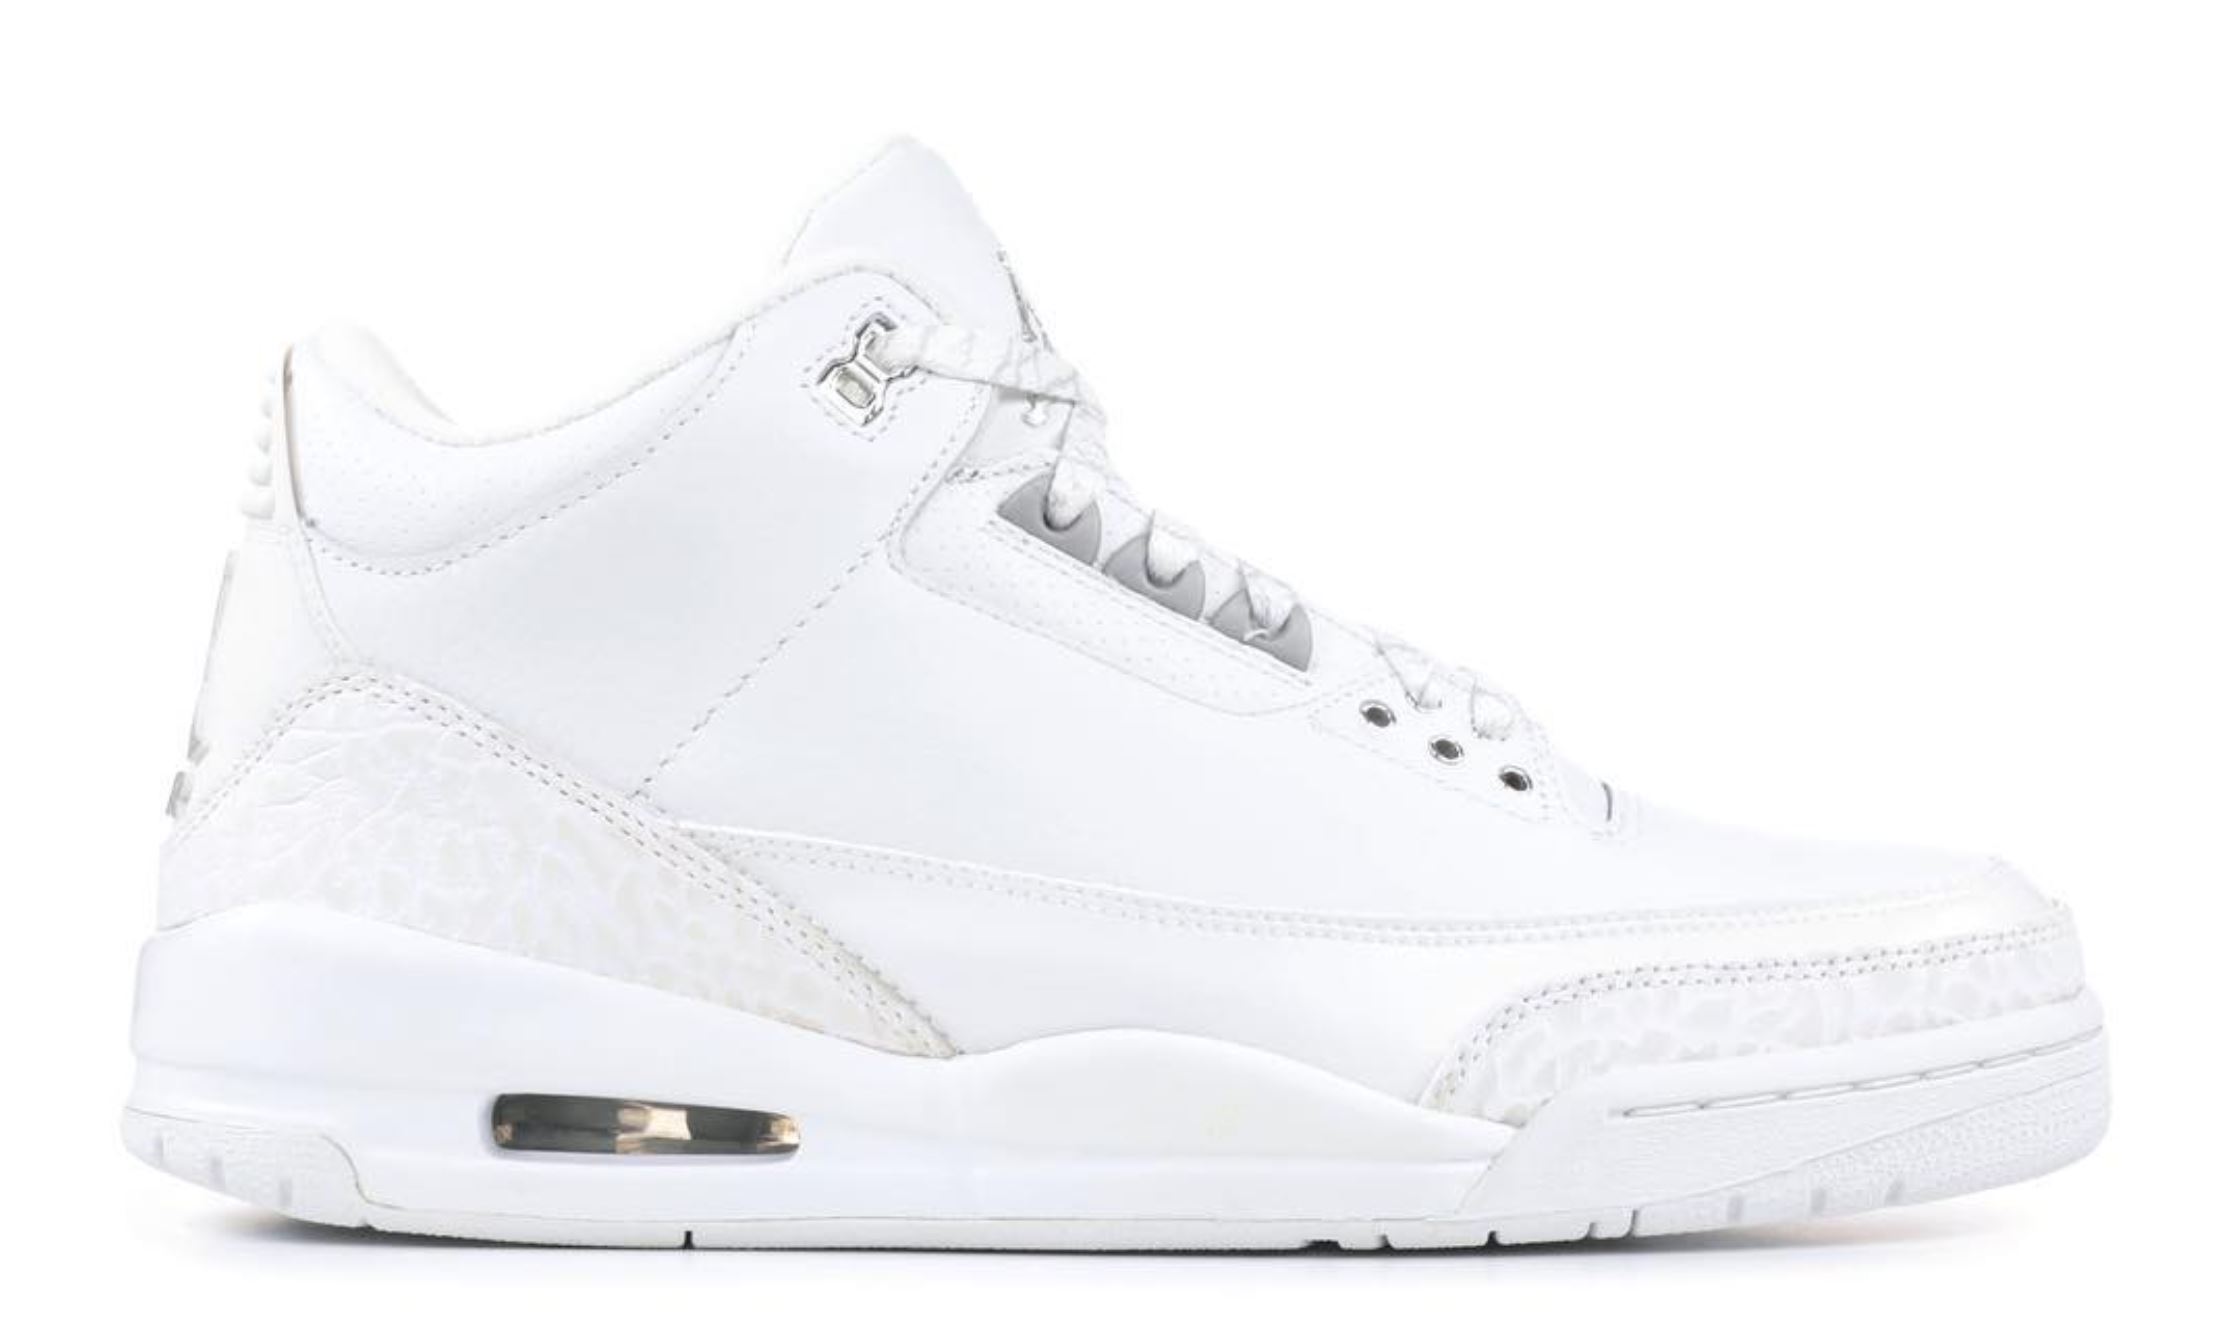 A White Air Jordan 3 Will Release for Summer - WearTesters